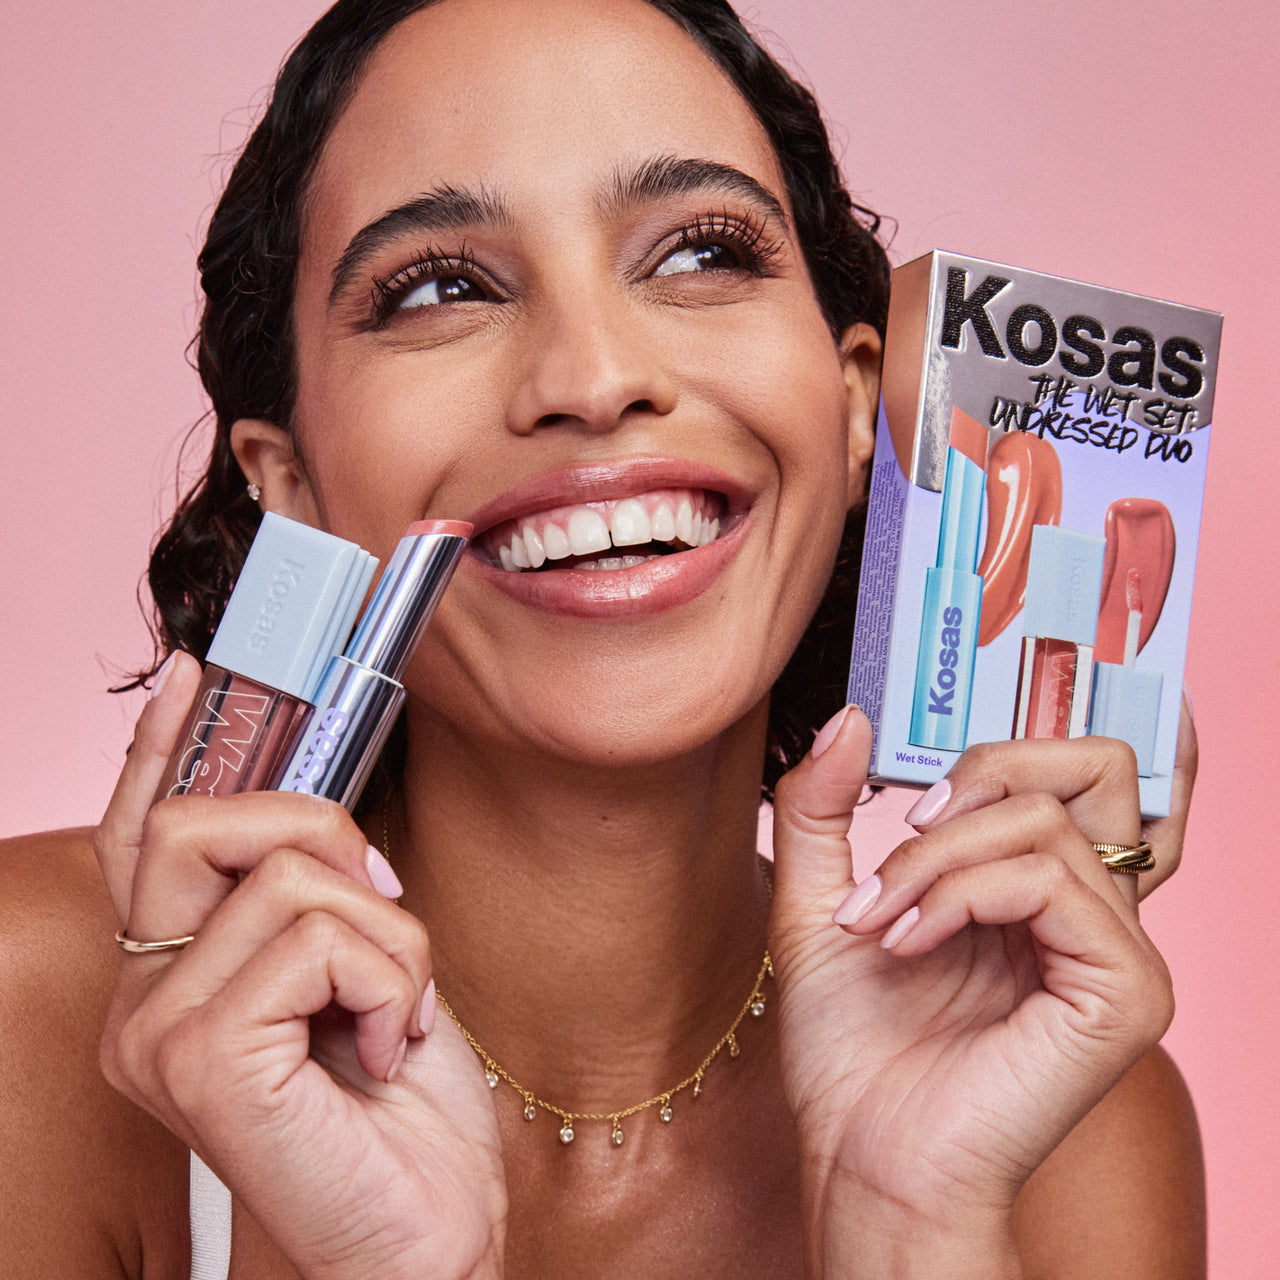 An image of a model holding the Kosas The Wet Set Undressed Duo